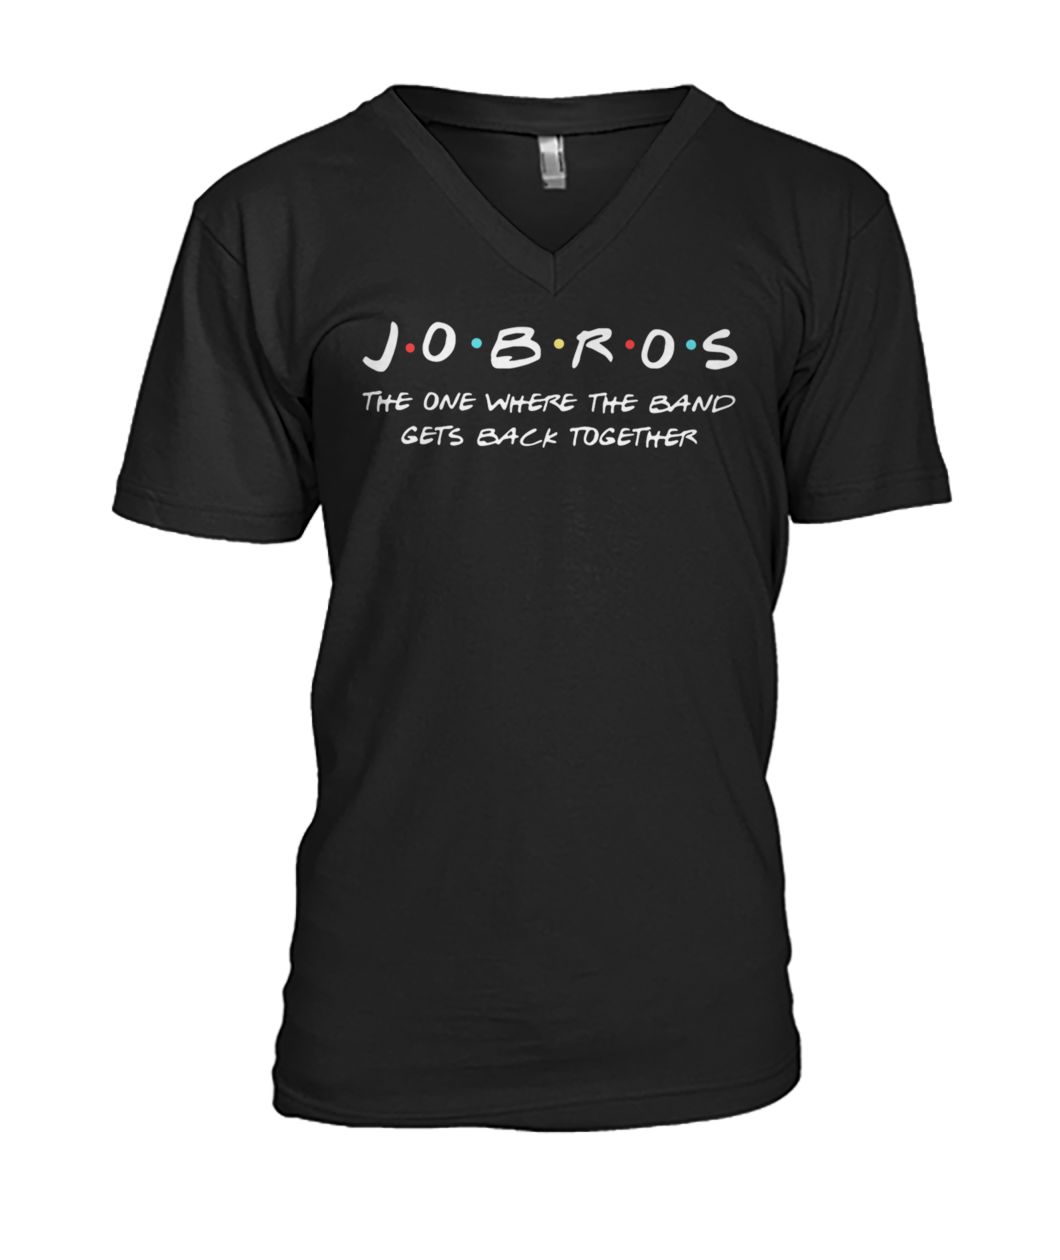 Jobros the one where the band gets back together men's v-neck